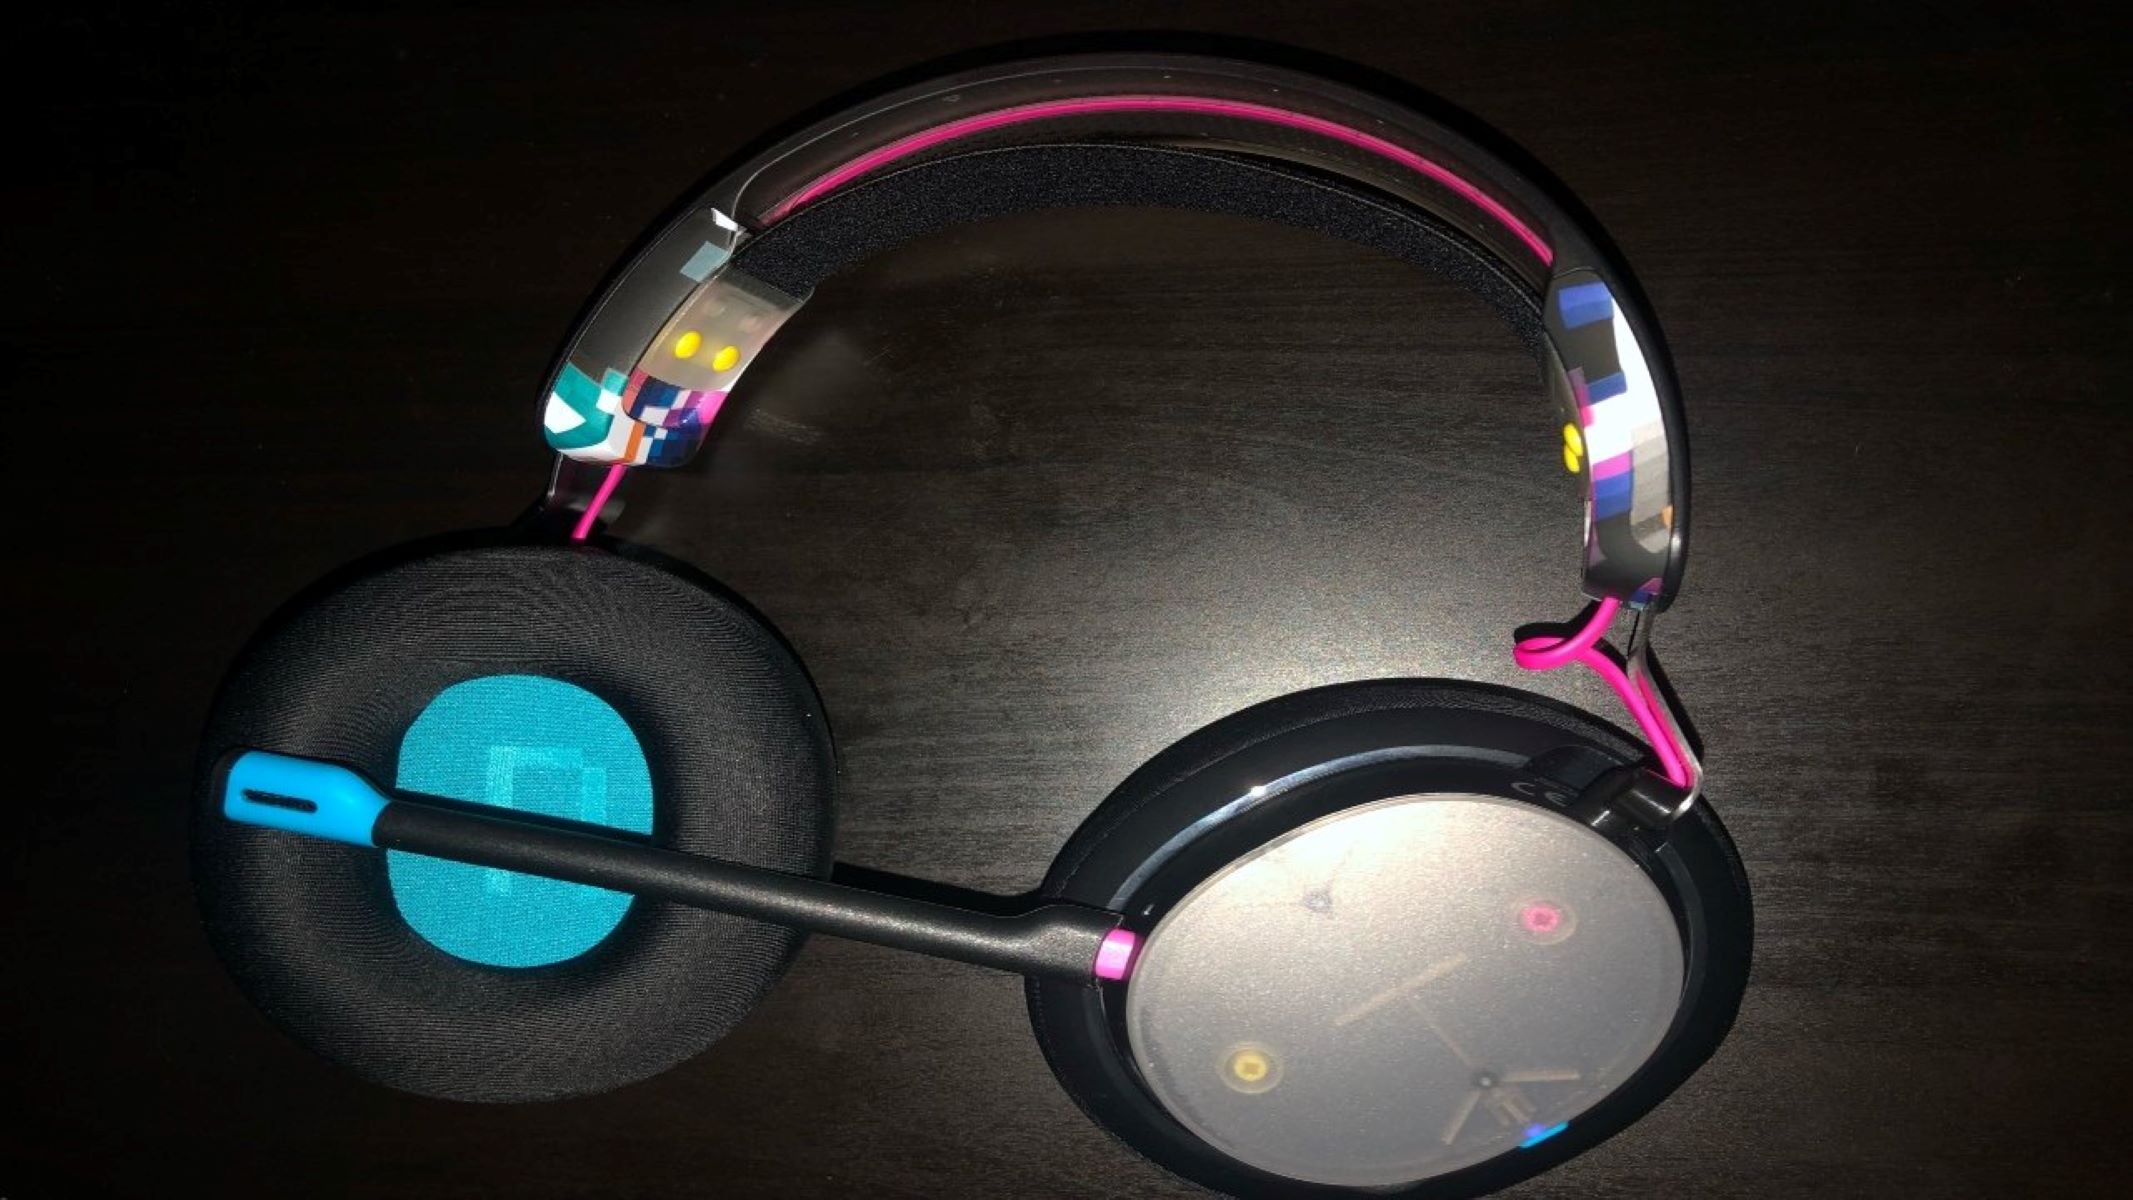 Connecting Your Skullcandy Headset: Step-by-Step